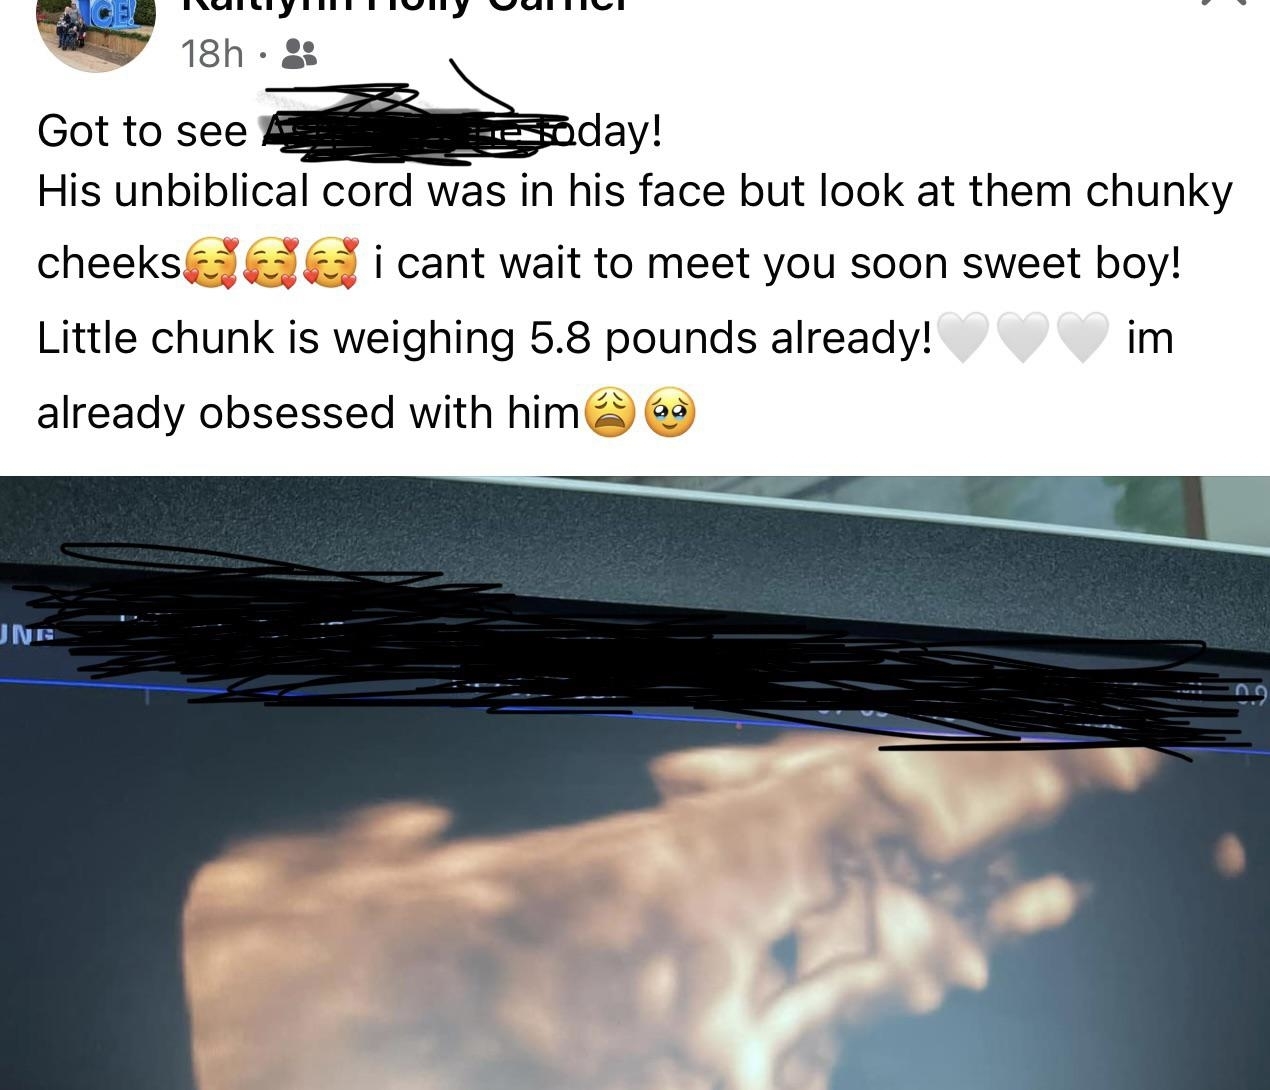 &quot;His unbiblical cord was in his face but look at them chunky cheeks! I can&#x27;t wait to meet you soon sweet boy! Little chunk is weighing 5.8 pounds already! I&#x27;m already obsessed with him&quot;